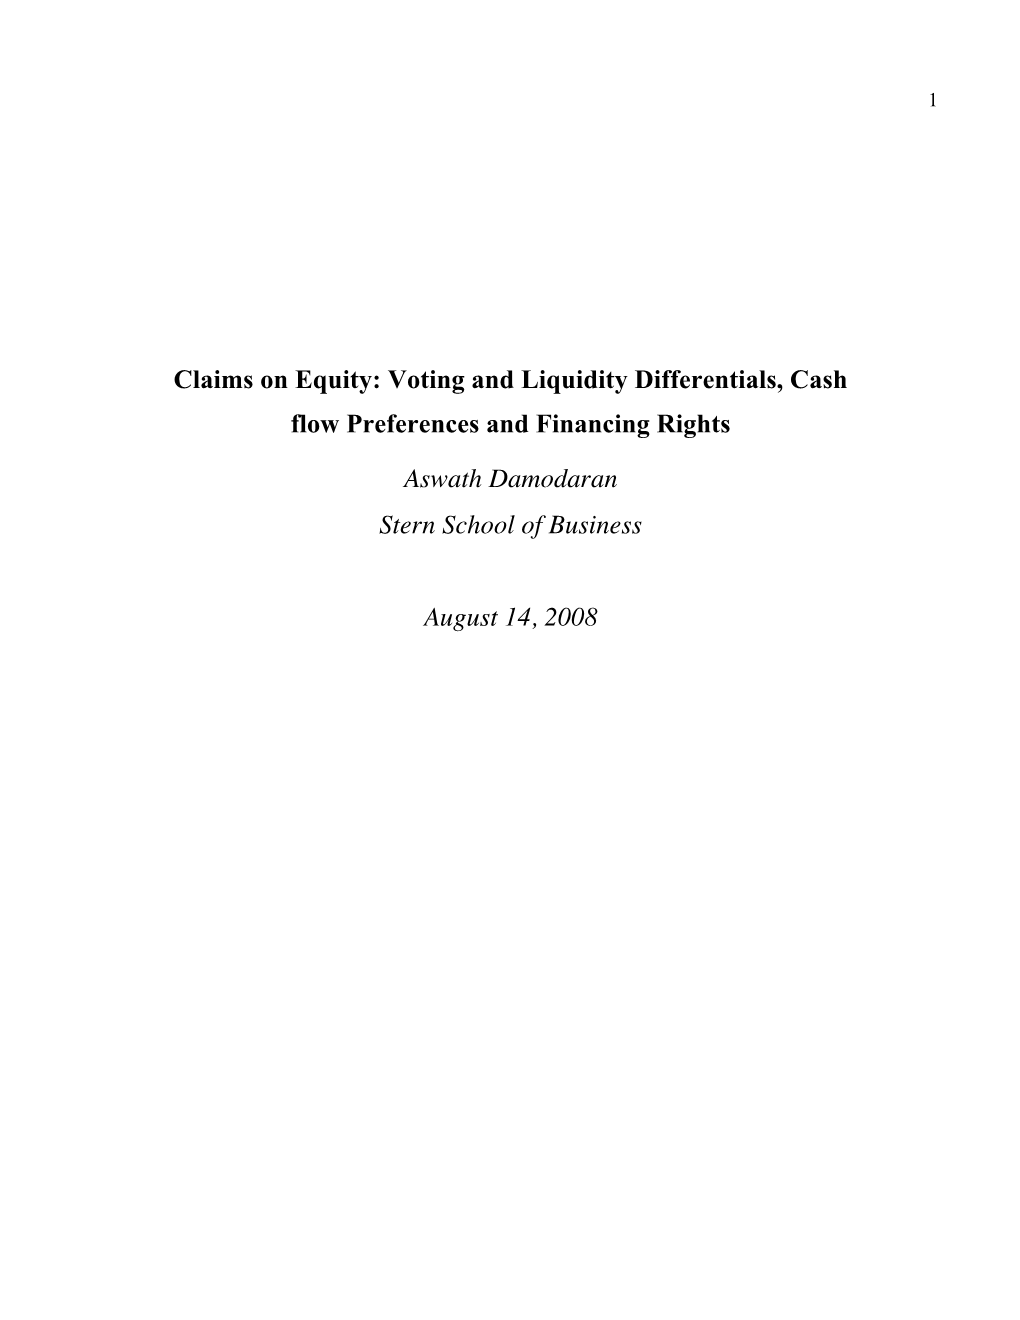 Claims on Equity: Voting and Liquidity Differentials, Cash Flow Preferences and Financing Rights